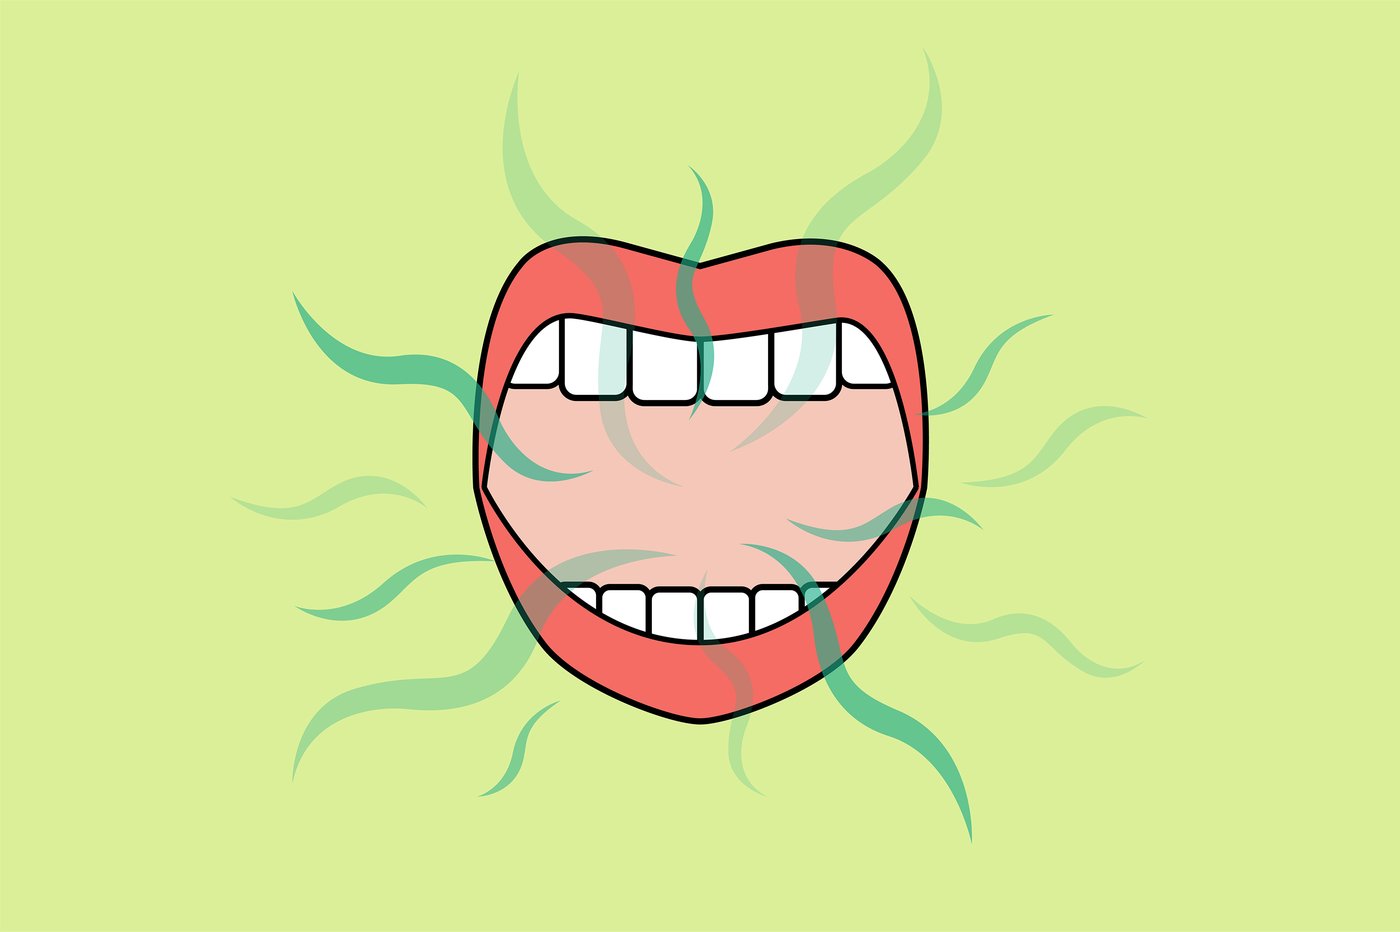 Causes of Bad Breath: What Are They?